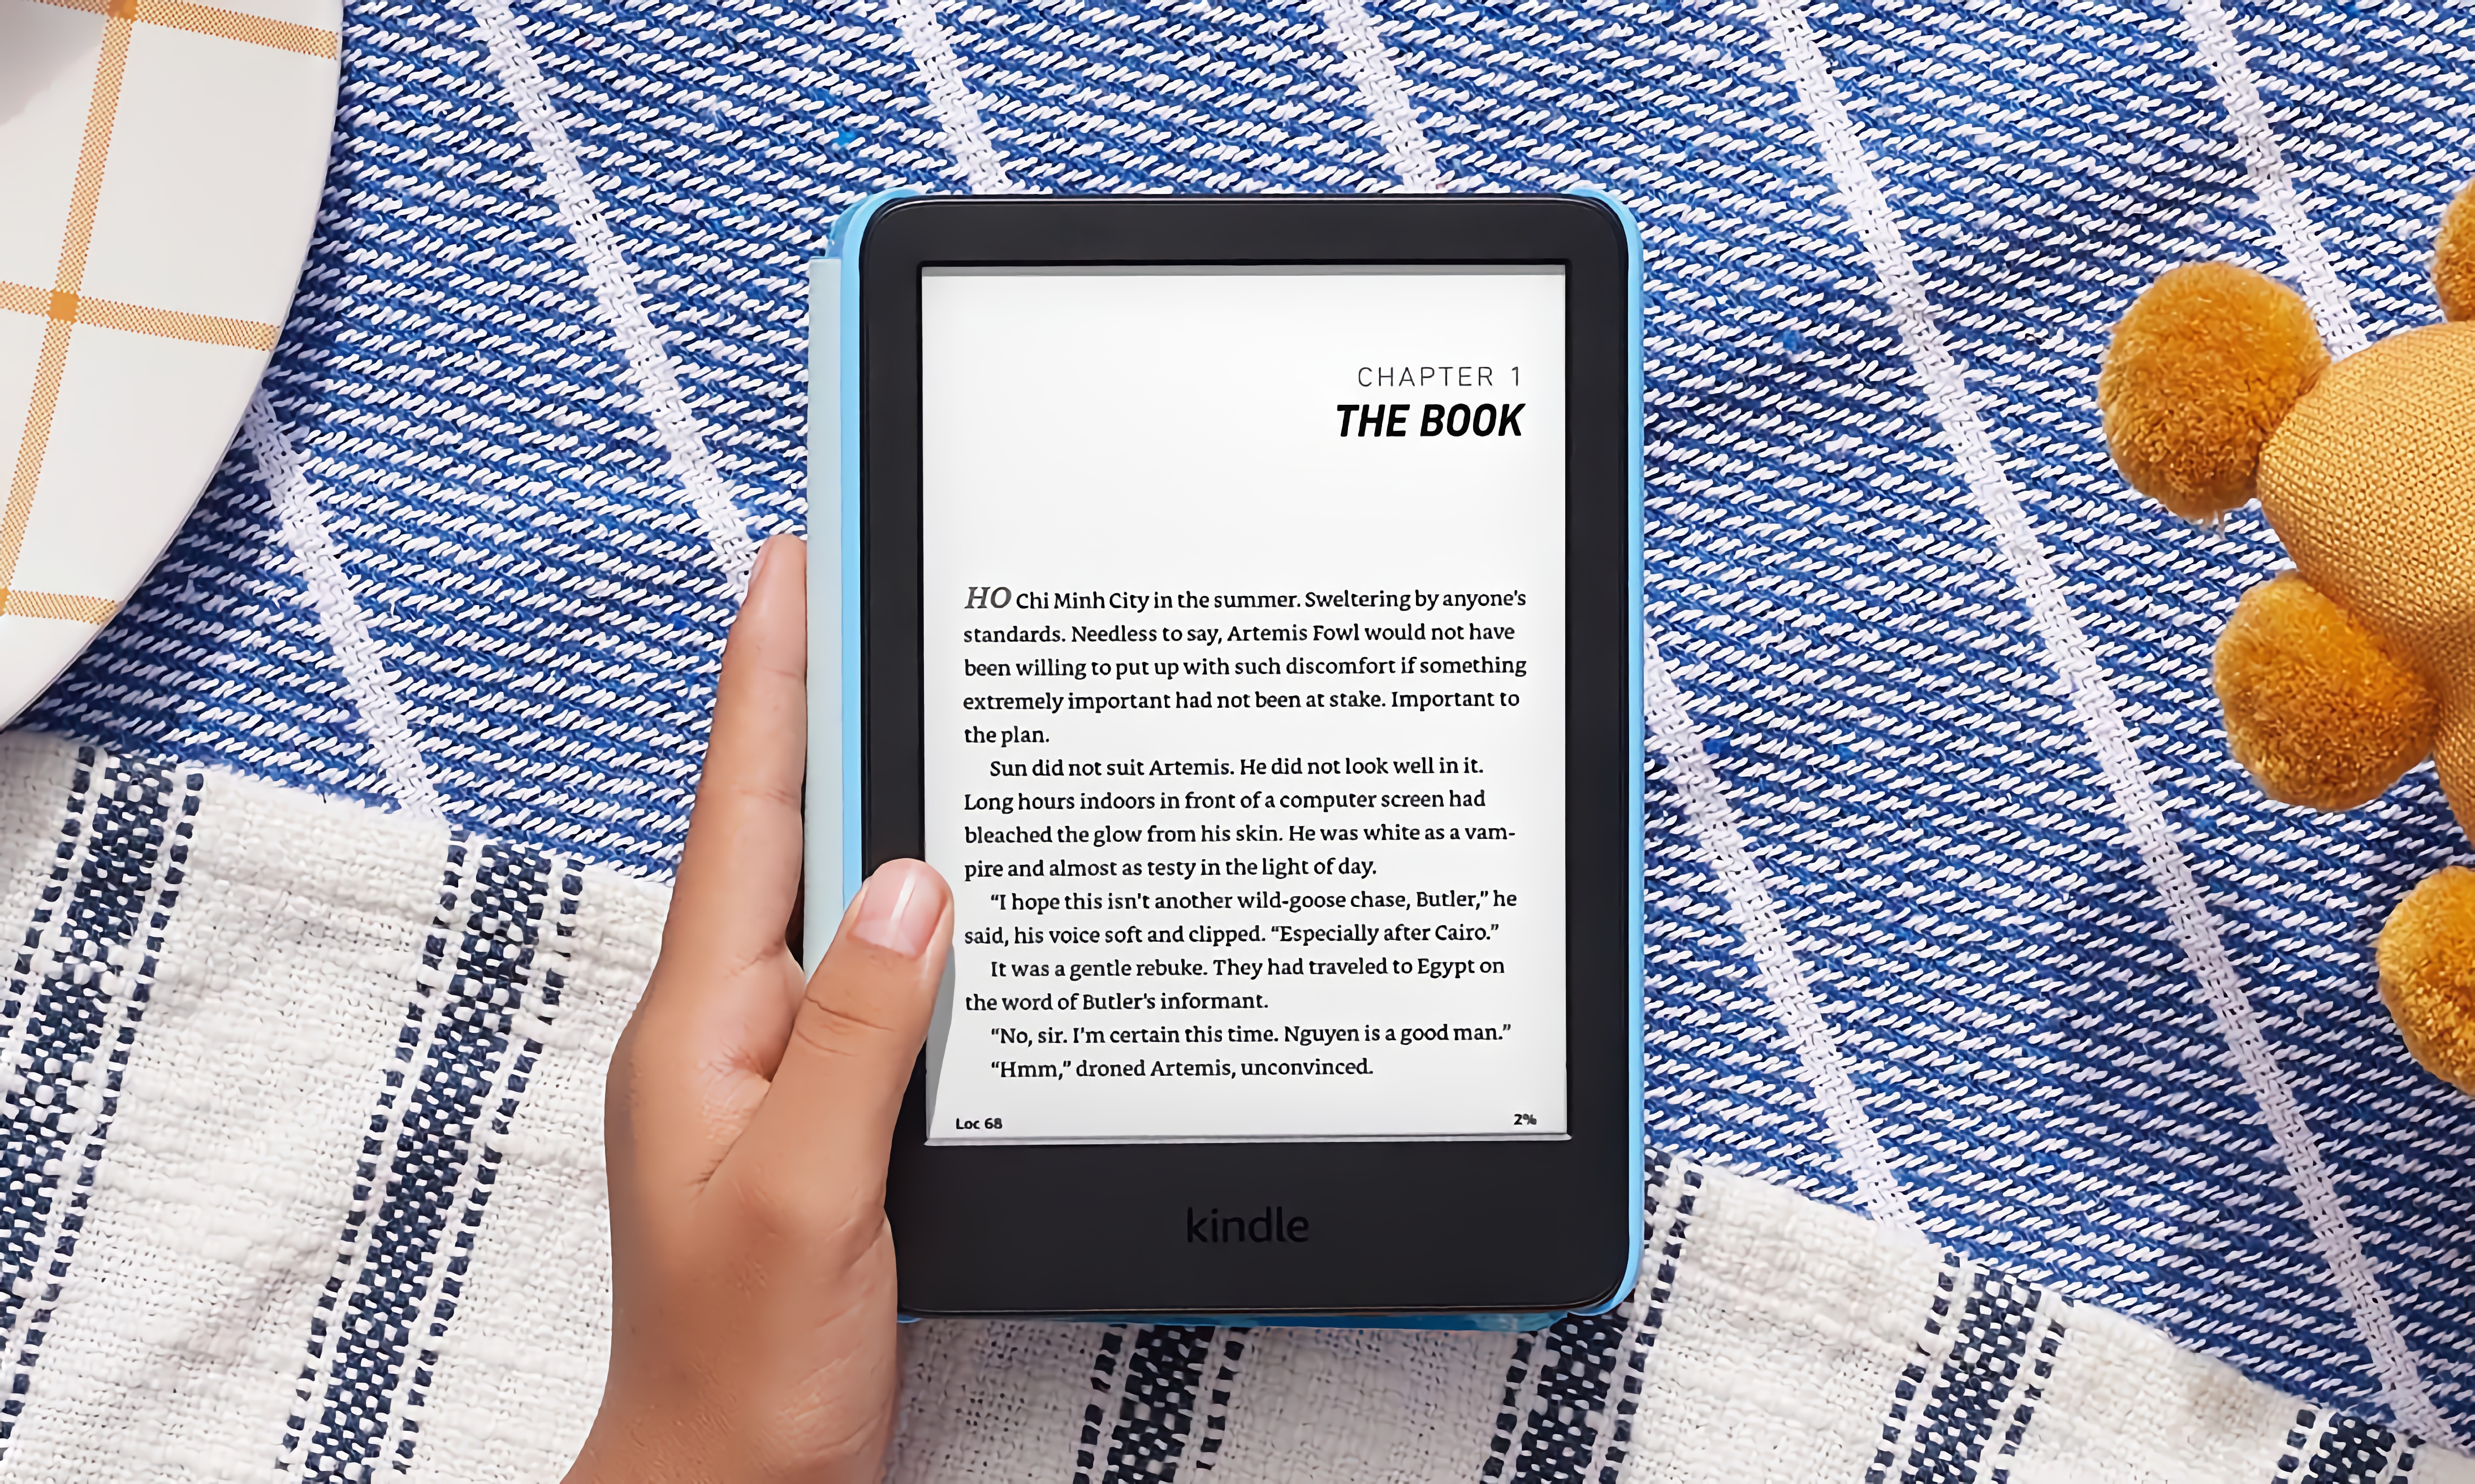 Amazon’s Kindle Kids e-reader is $40 off right now